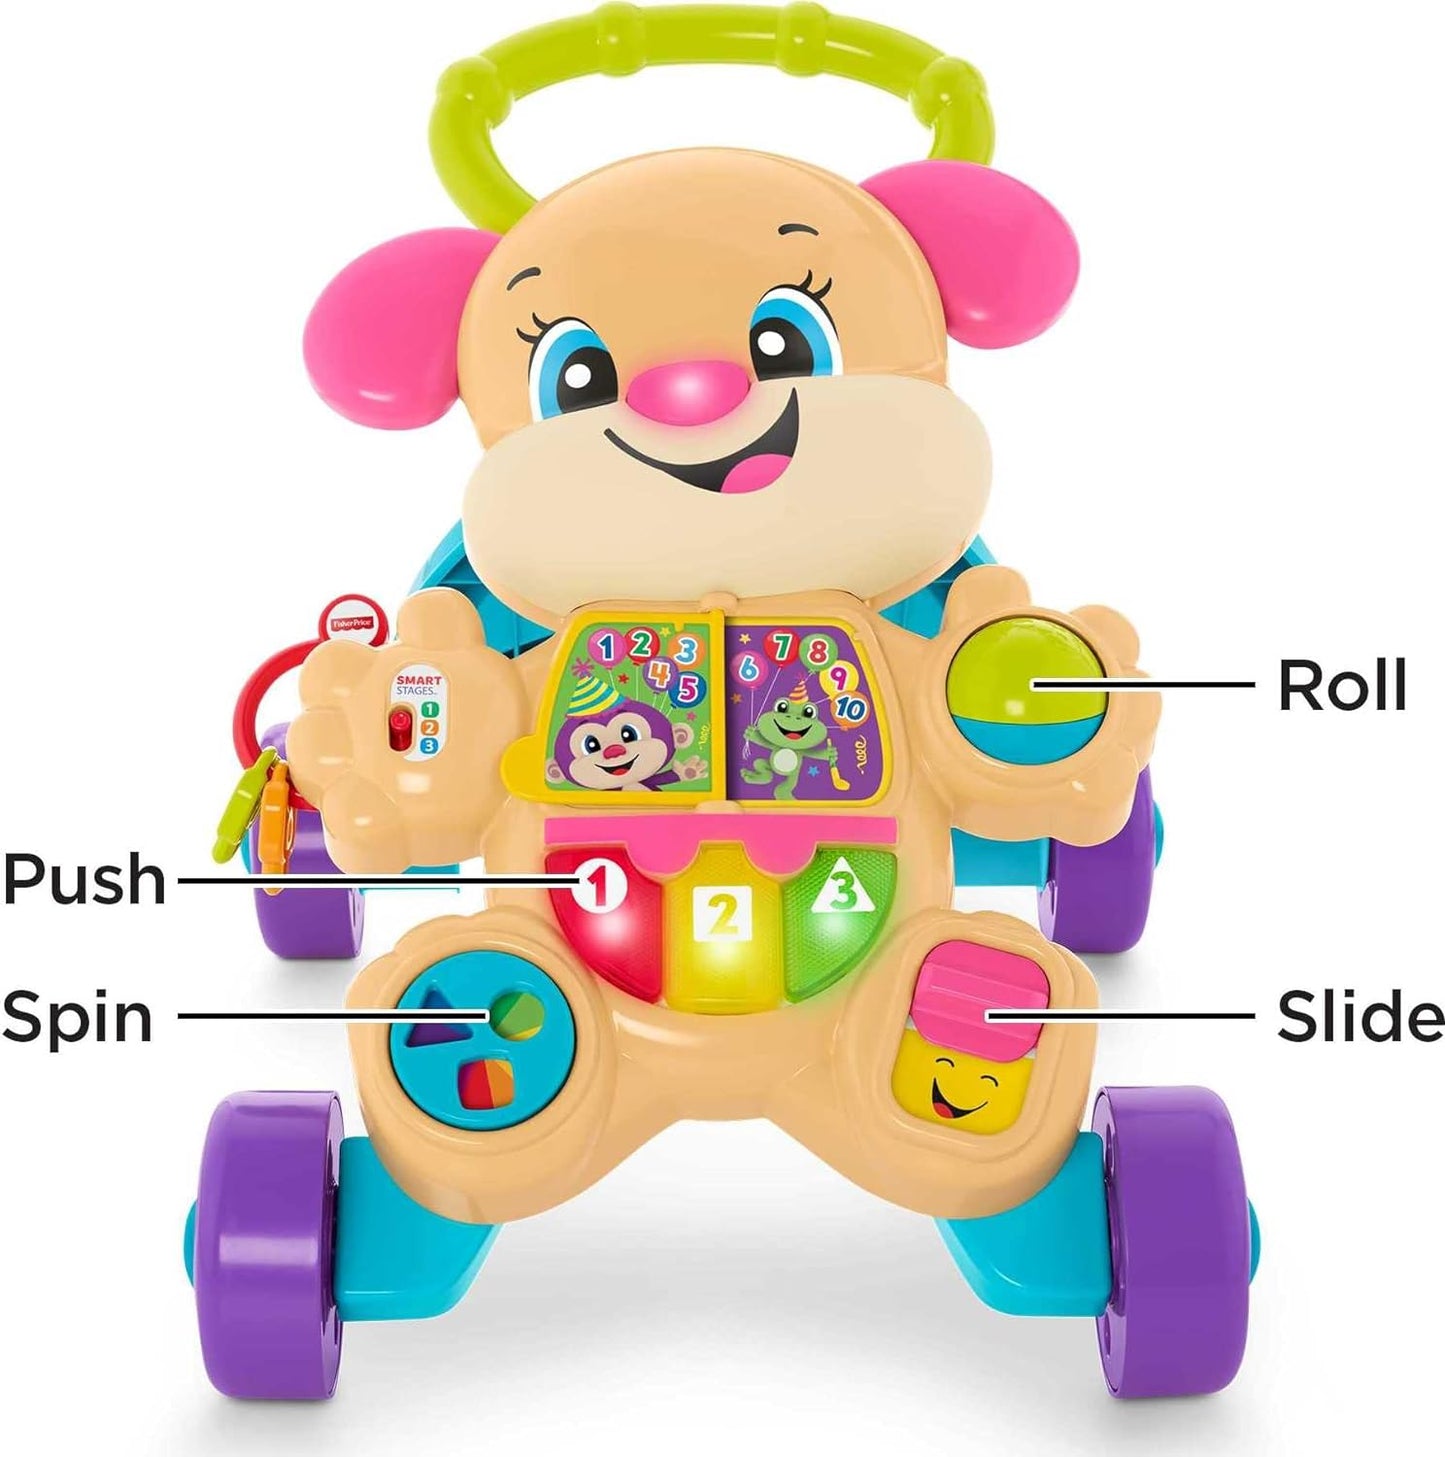 Fisher-Price - Musical Lion Walker (Styles Vary)